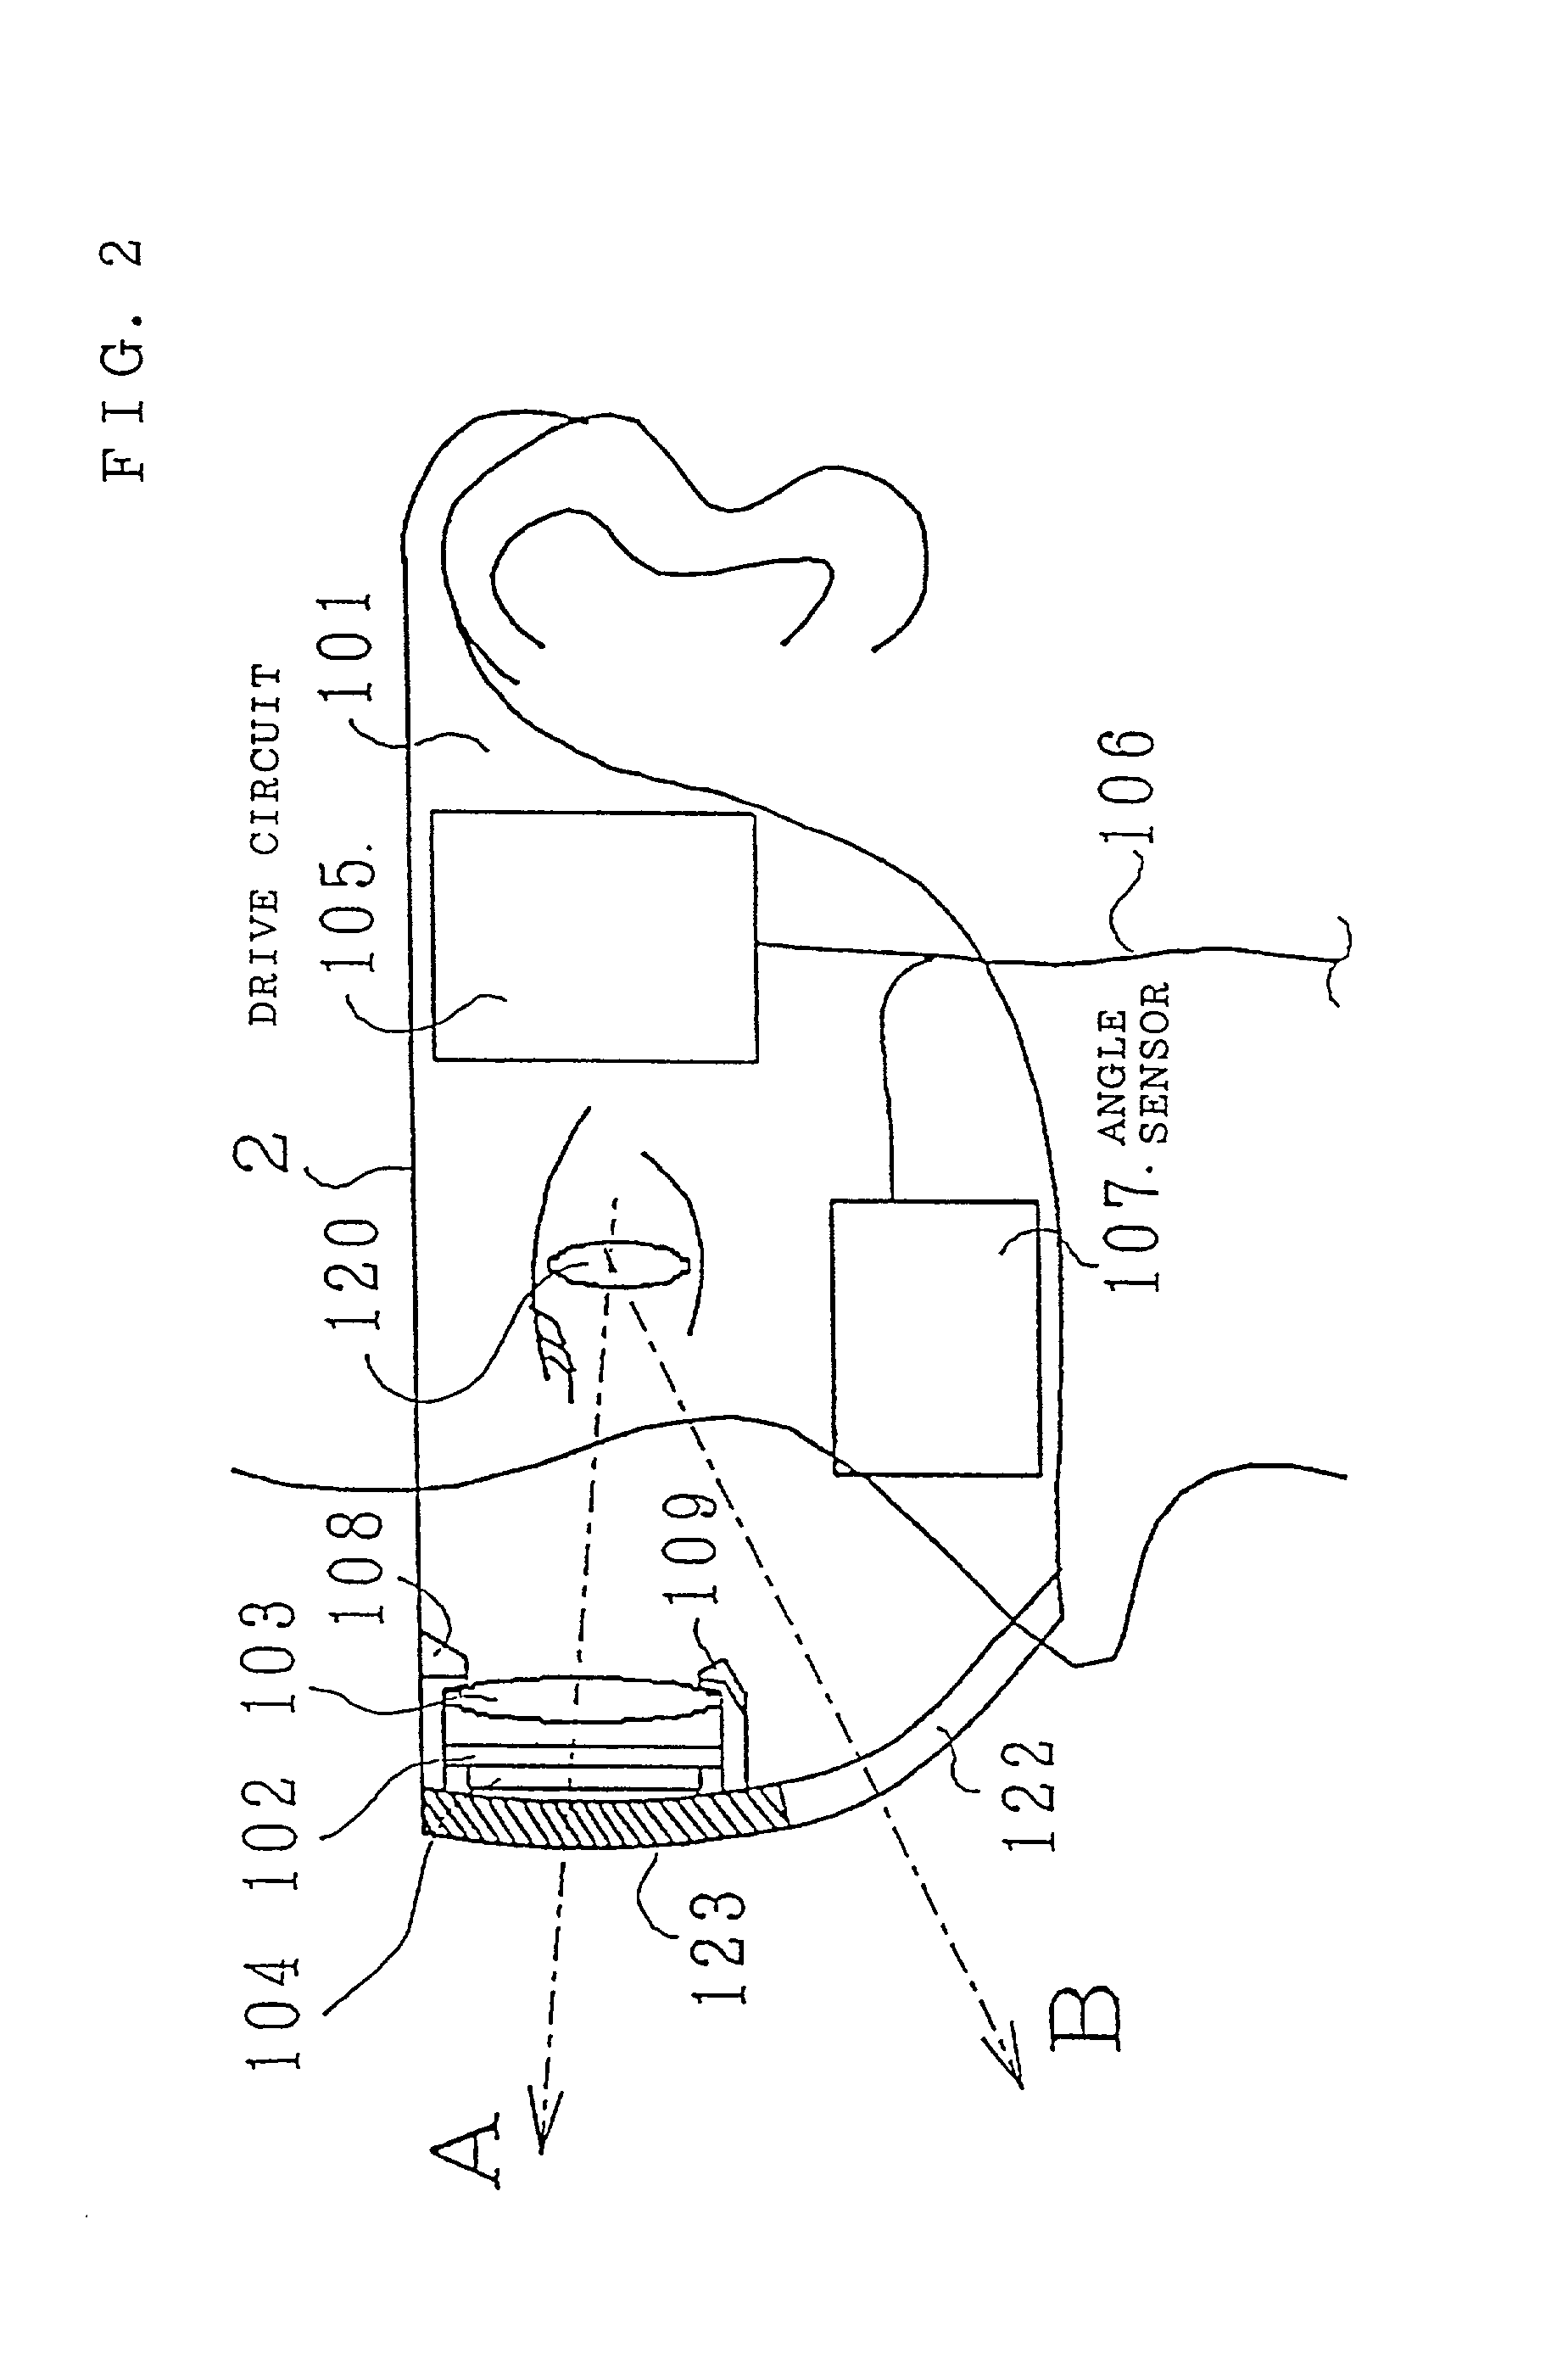 Head-mounted image display device and data processing apparatus including the same